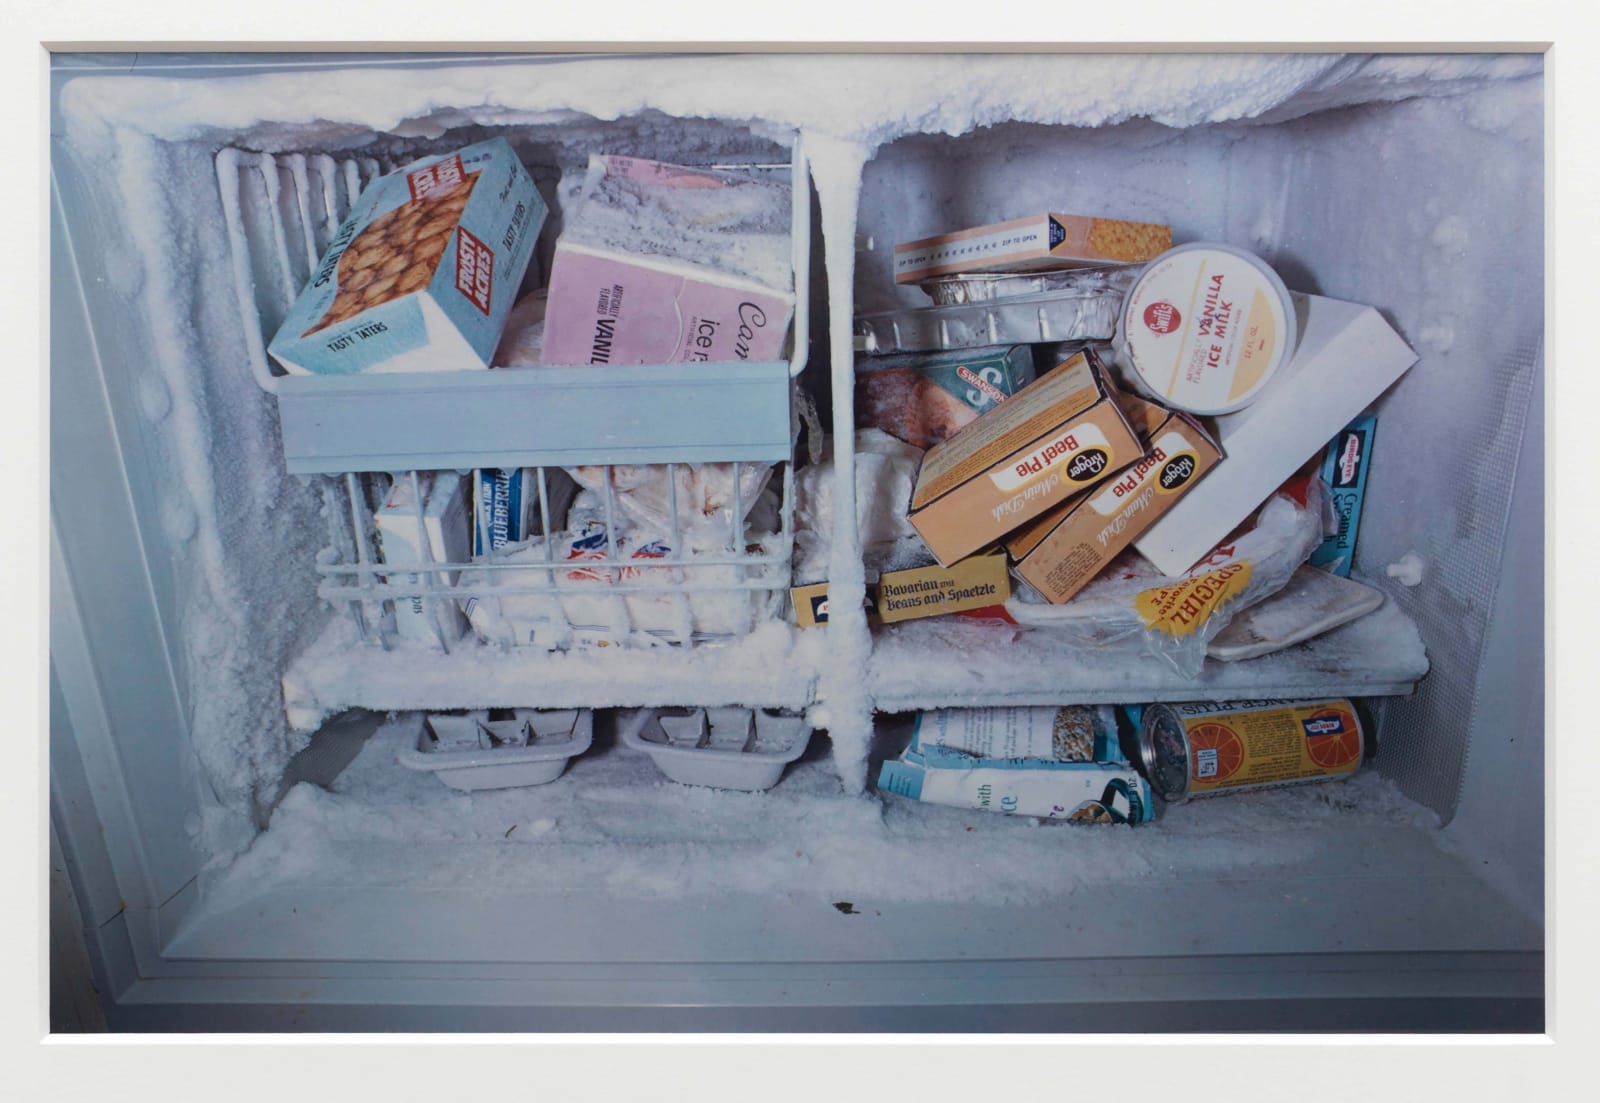 William Eggleston Untitled (from the Troubled Waters Portfolio) freezer full of packaged food